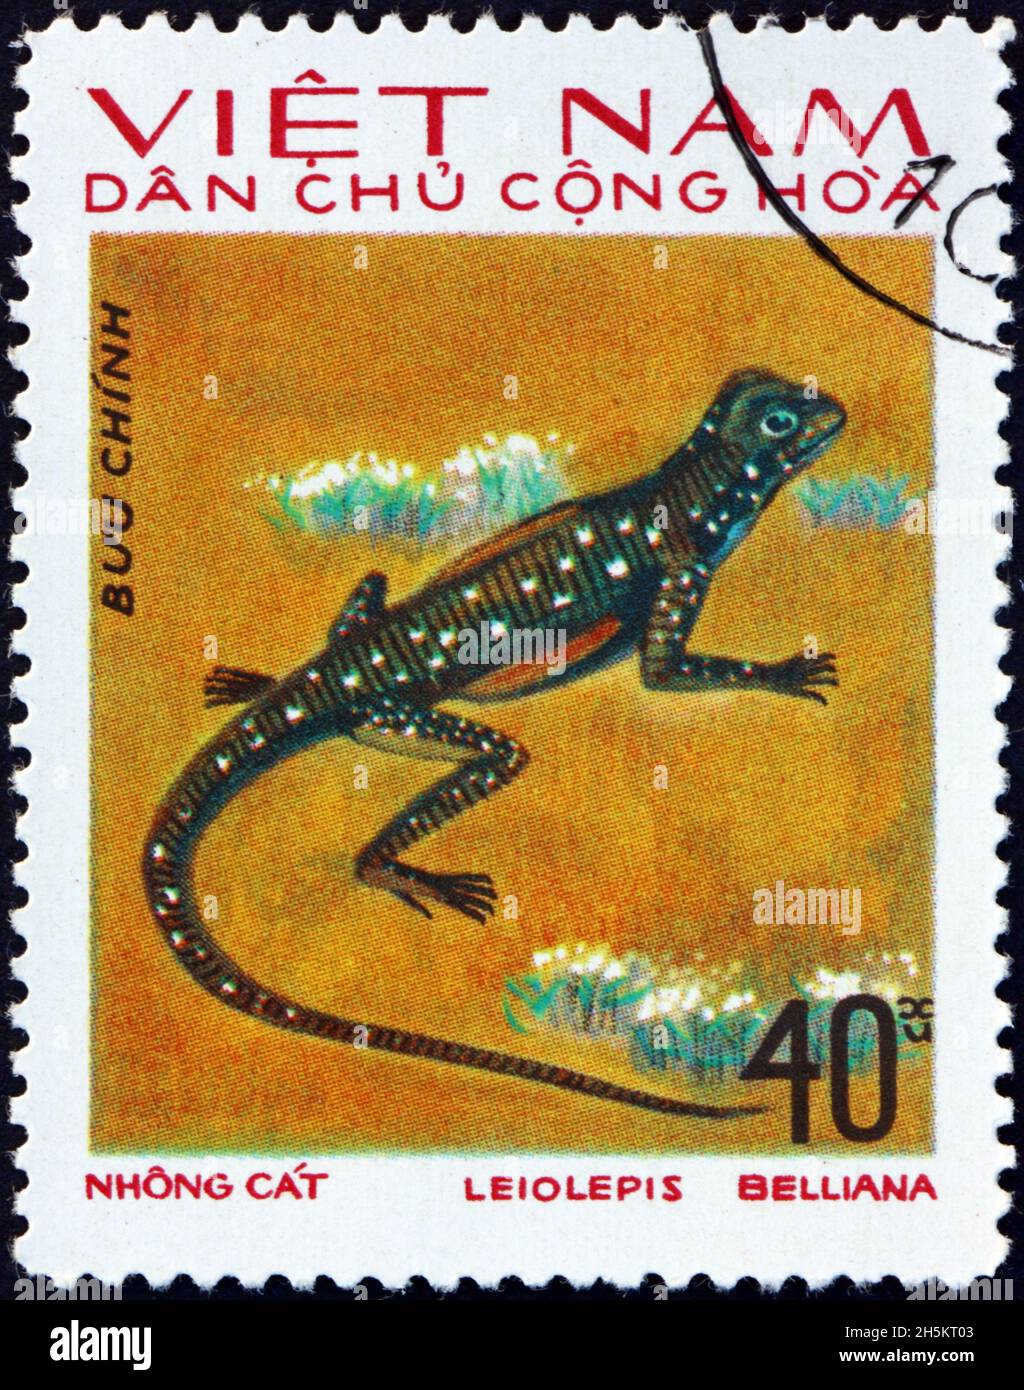 VIETNAM - CIRCA 1975: a stamp printed in Vietnam shows butterfly lizard, leiolepis belliana, is a widespread species native to Asia, circa 1975 Stock Photo